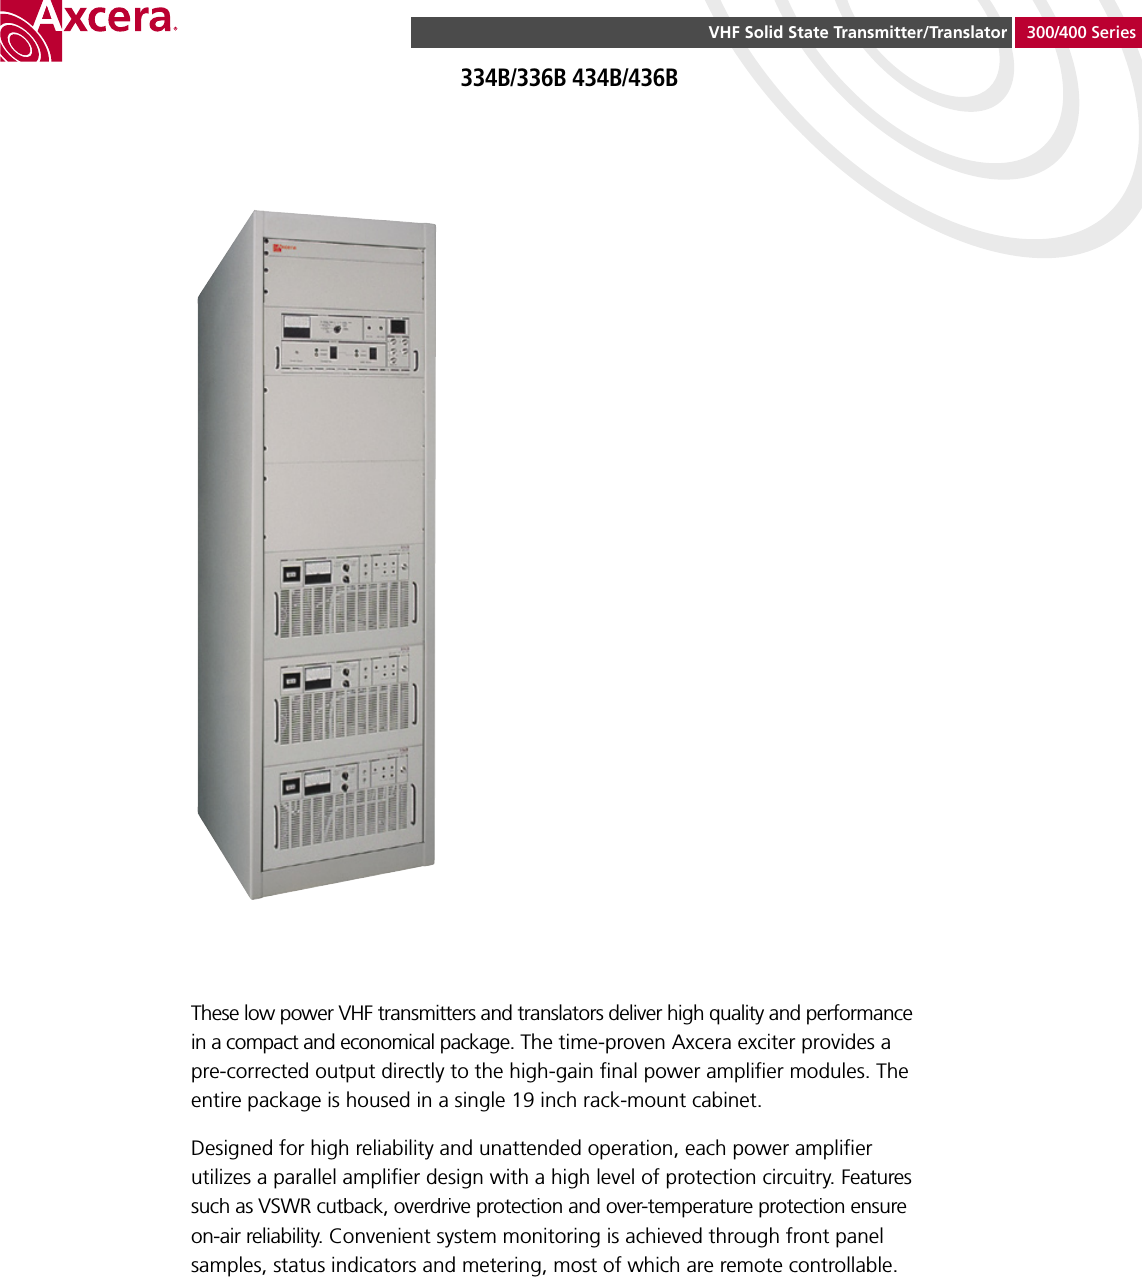 VHF Solid State Transmitter/Translator 300/400 Series334B/336B 434B/436BThese low power VHF transmitters and translators deliver high quality and performance in a compact and economical package. The time-proven Axcera exciter provides a pre-corrected output directly to the high-gain  nal power ampli er modules. The entire package is housed in a single 19 inch rack-mount cabinet.Designed for high reliability and unattended operation, each power ampli er utilizes a parallel ampli er design with a high level of protection circuitry. Features such as VSWR cutback, overdrive protection and over-temperature protection ensure on-air reliability. Convenient system monitoring is achieved through front panel samples, status indicators and metering, most of which are remote controllable.